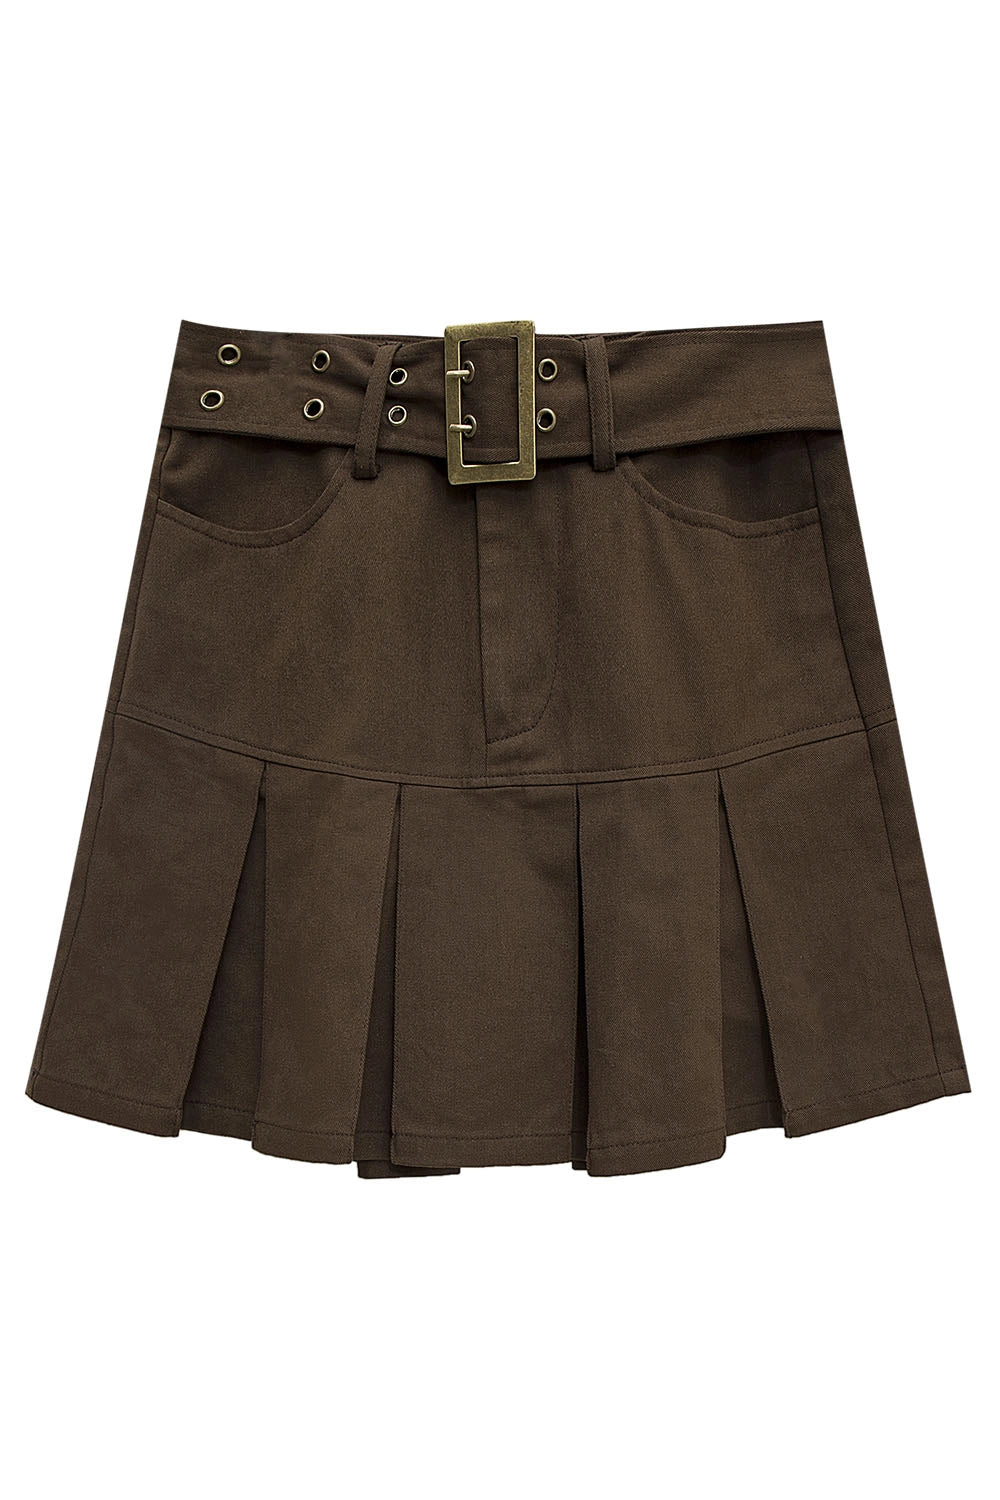 Woman's Pleated High-Waist Skirt with Belted Detail and Grommet Accents